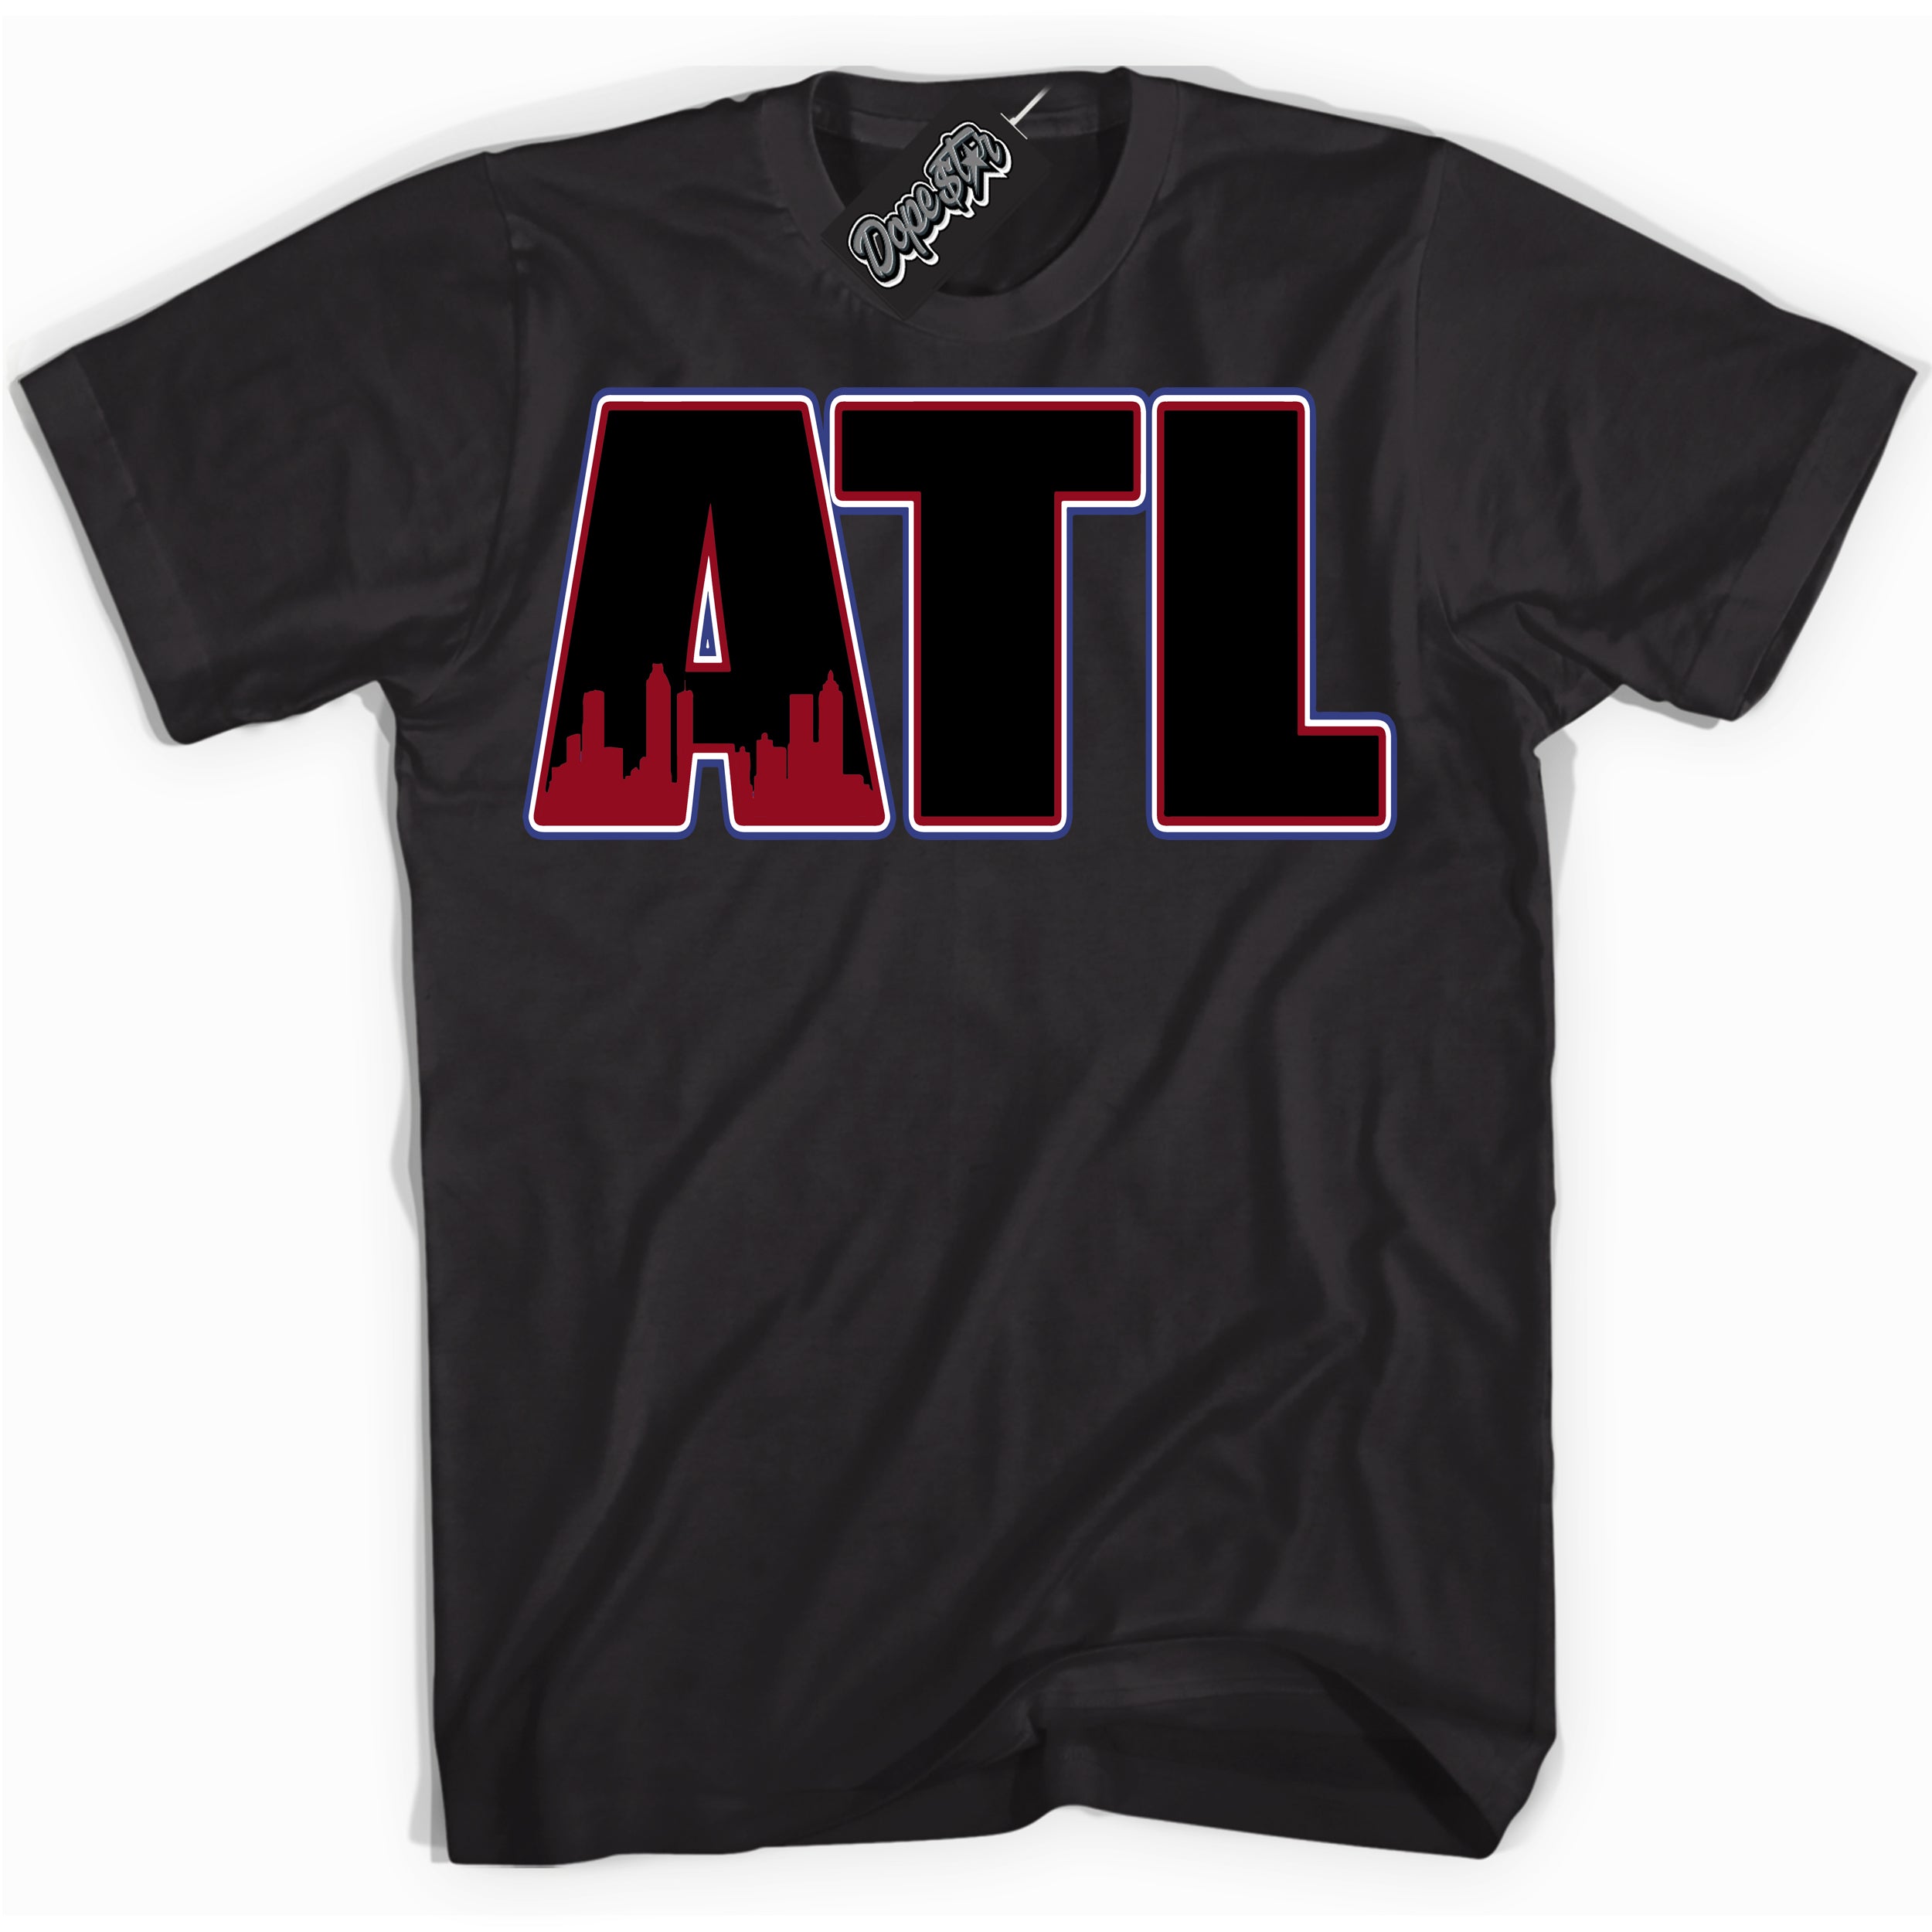 Cool Black Shirt with “ Atlanta ” design that perfectly matches Playoffs 8s Sneakers.